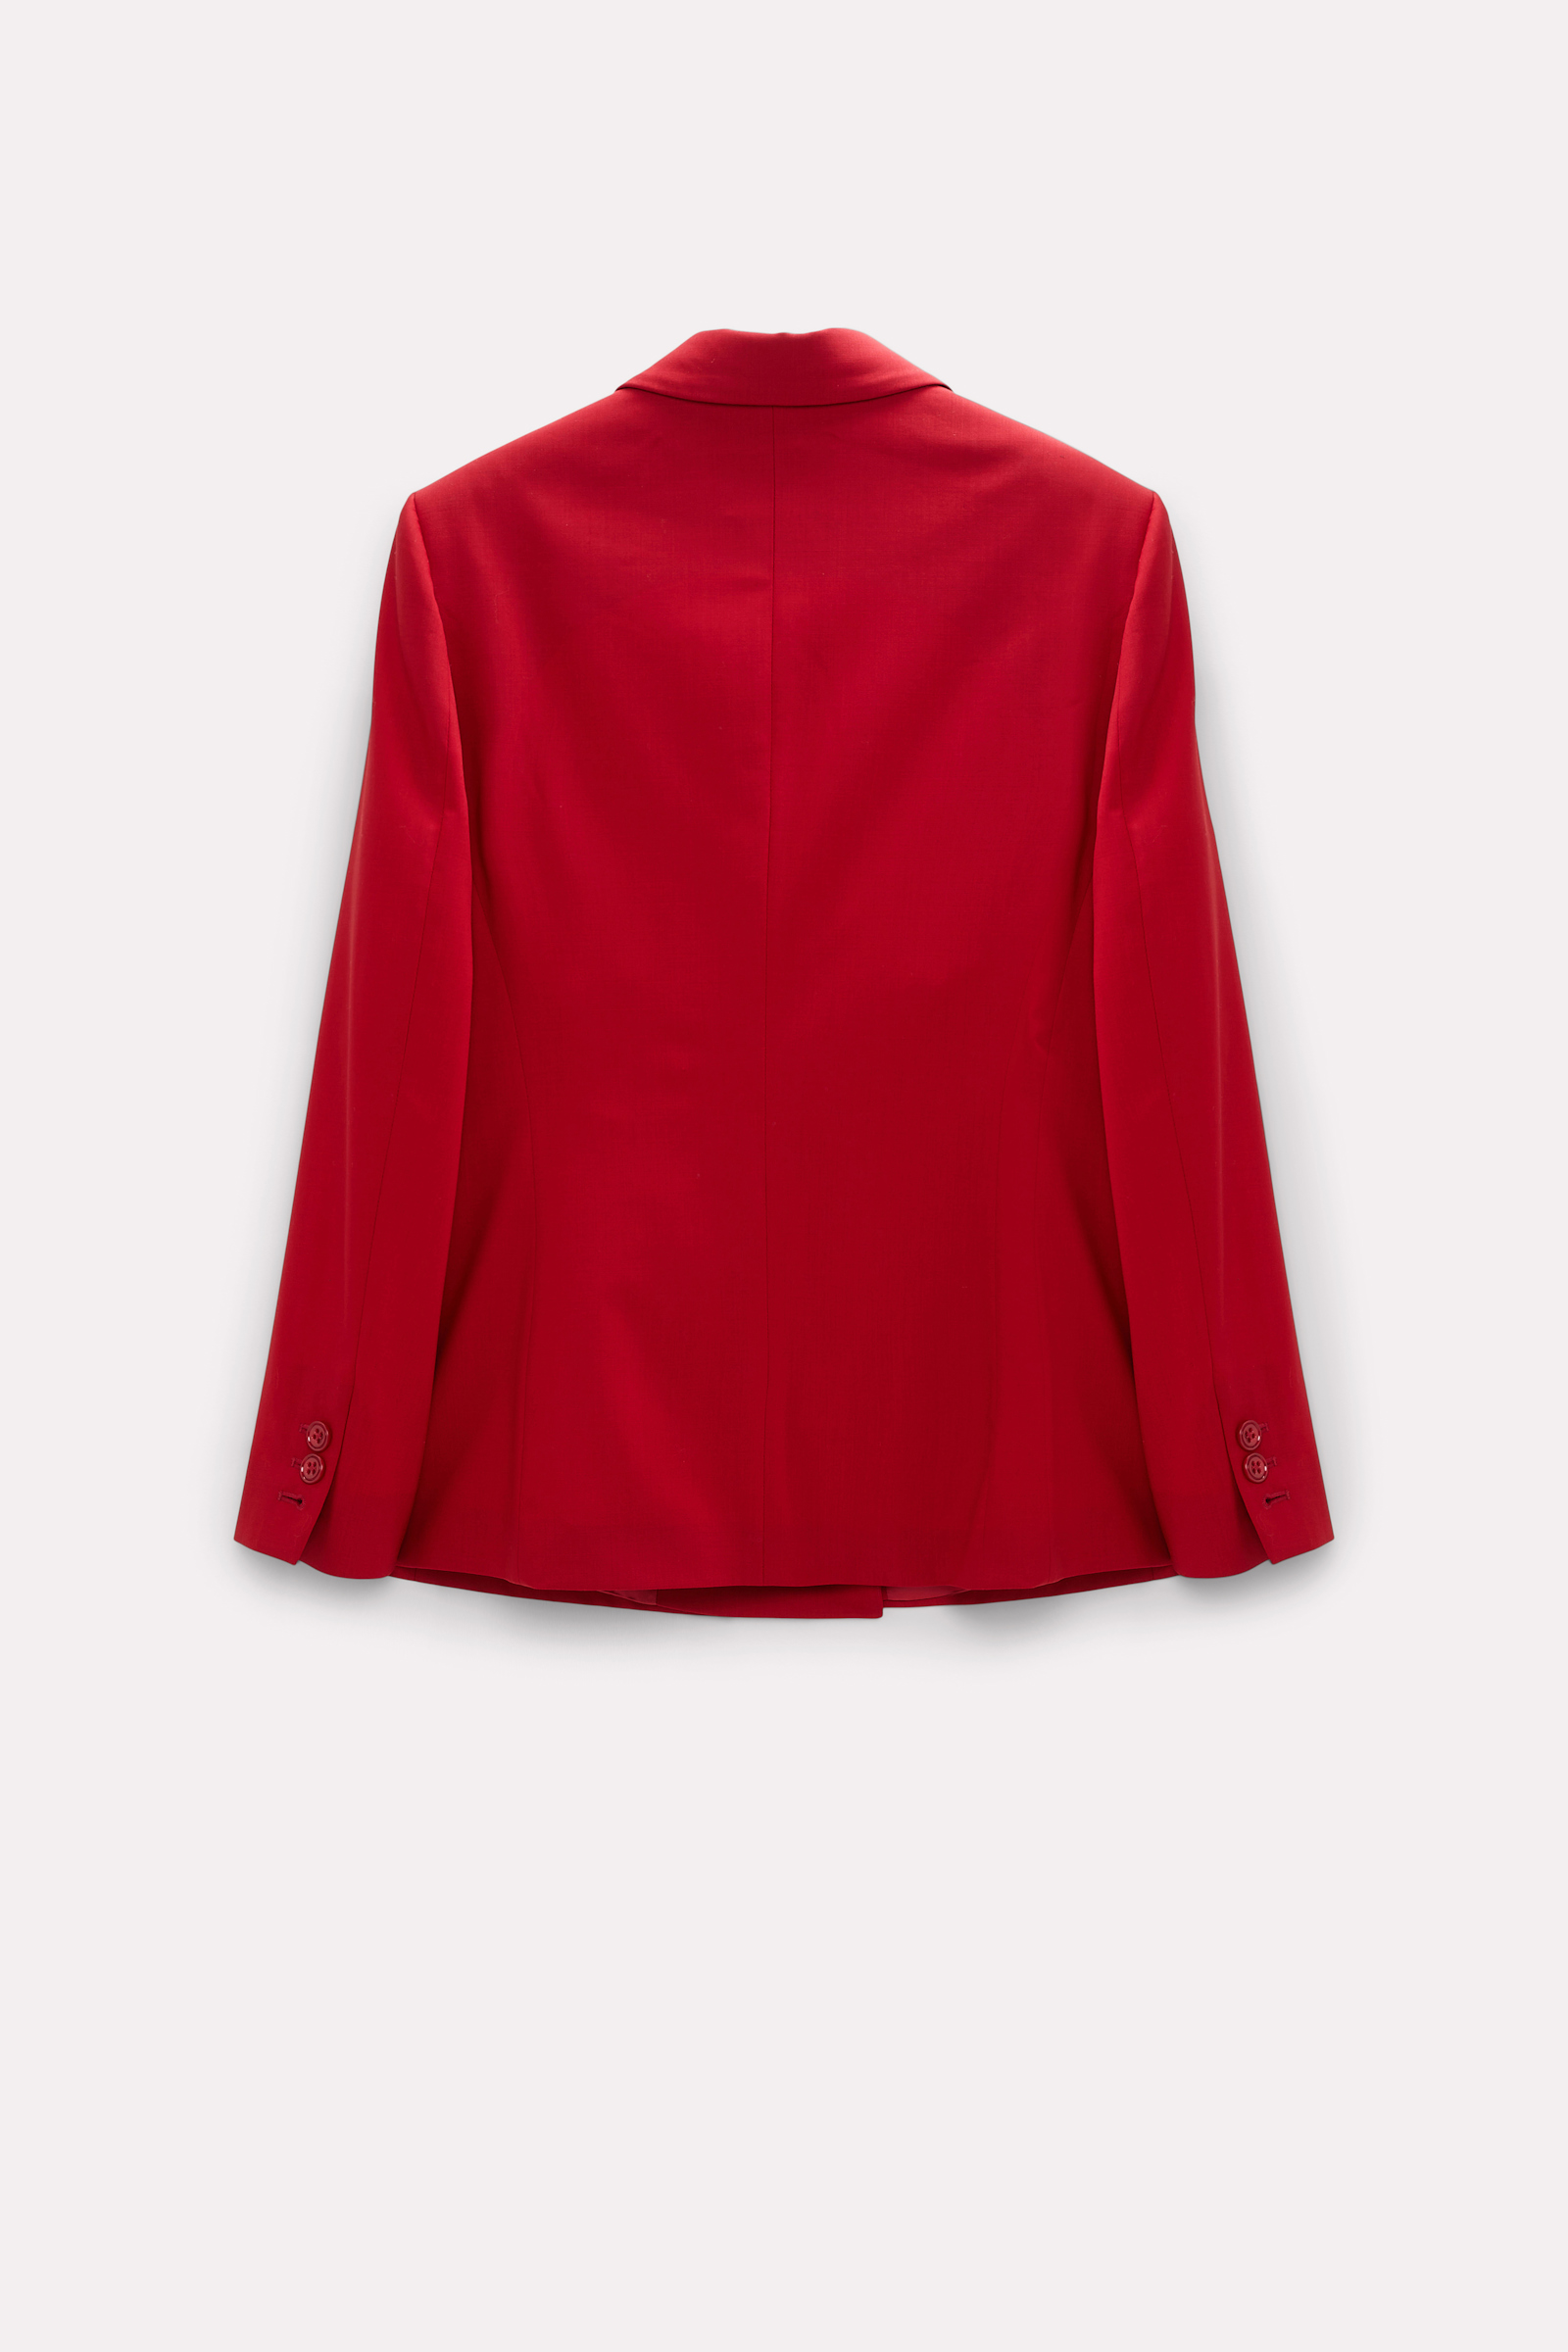 Dorothee Schumacher Double-breasted blazer adored red